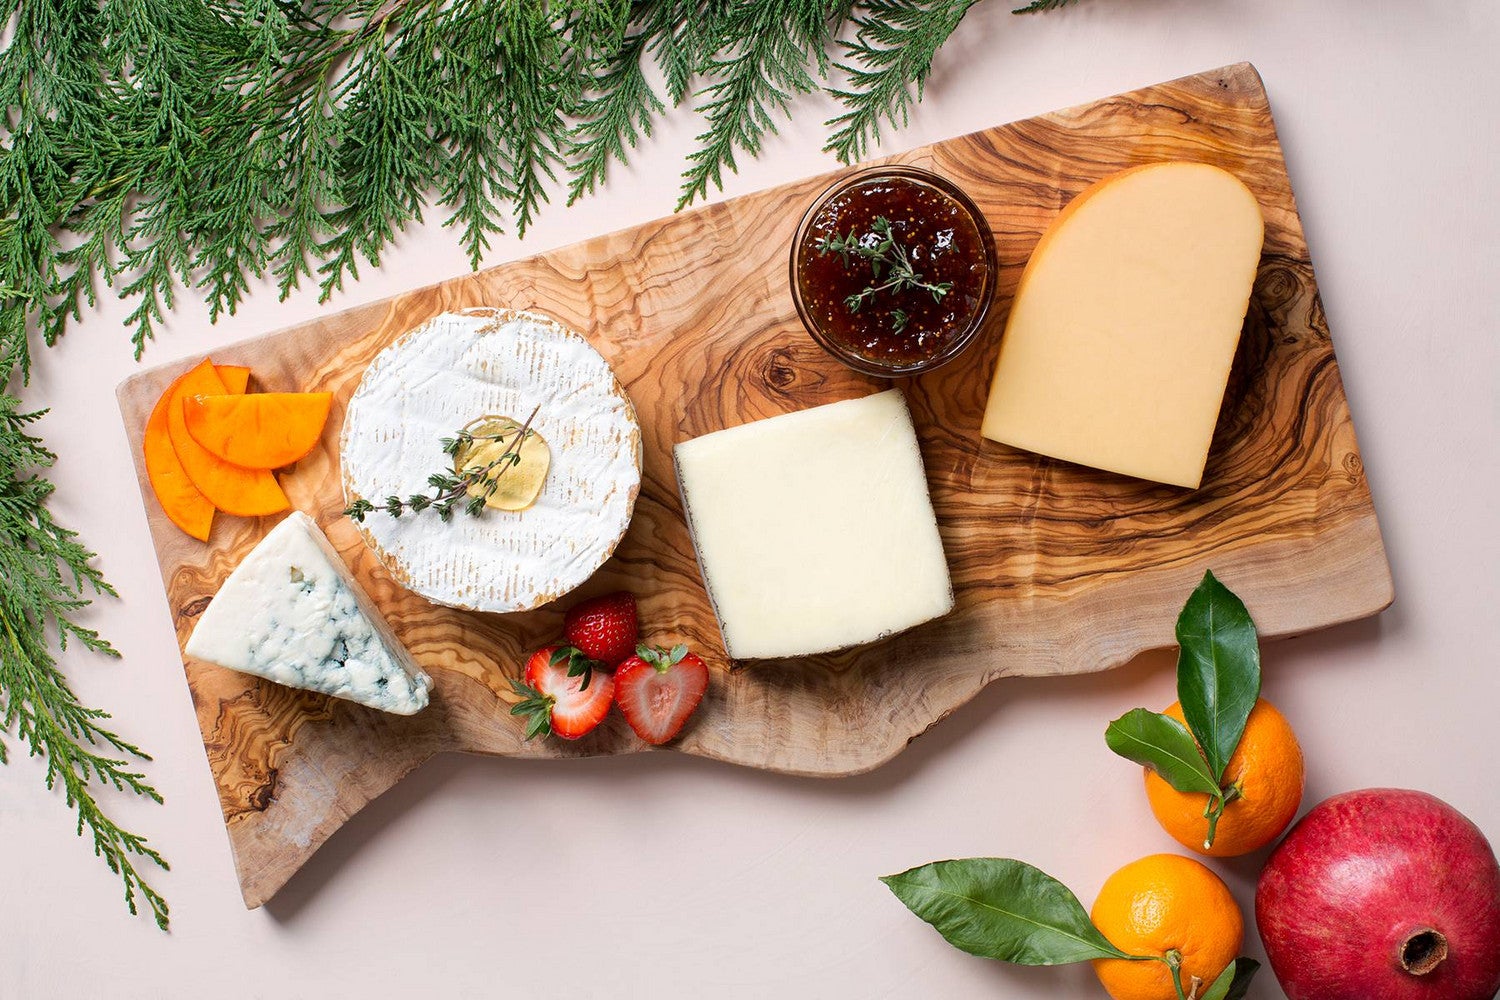 How to Make a Cheese Board in Under Five Minutes